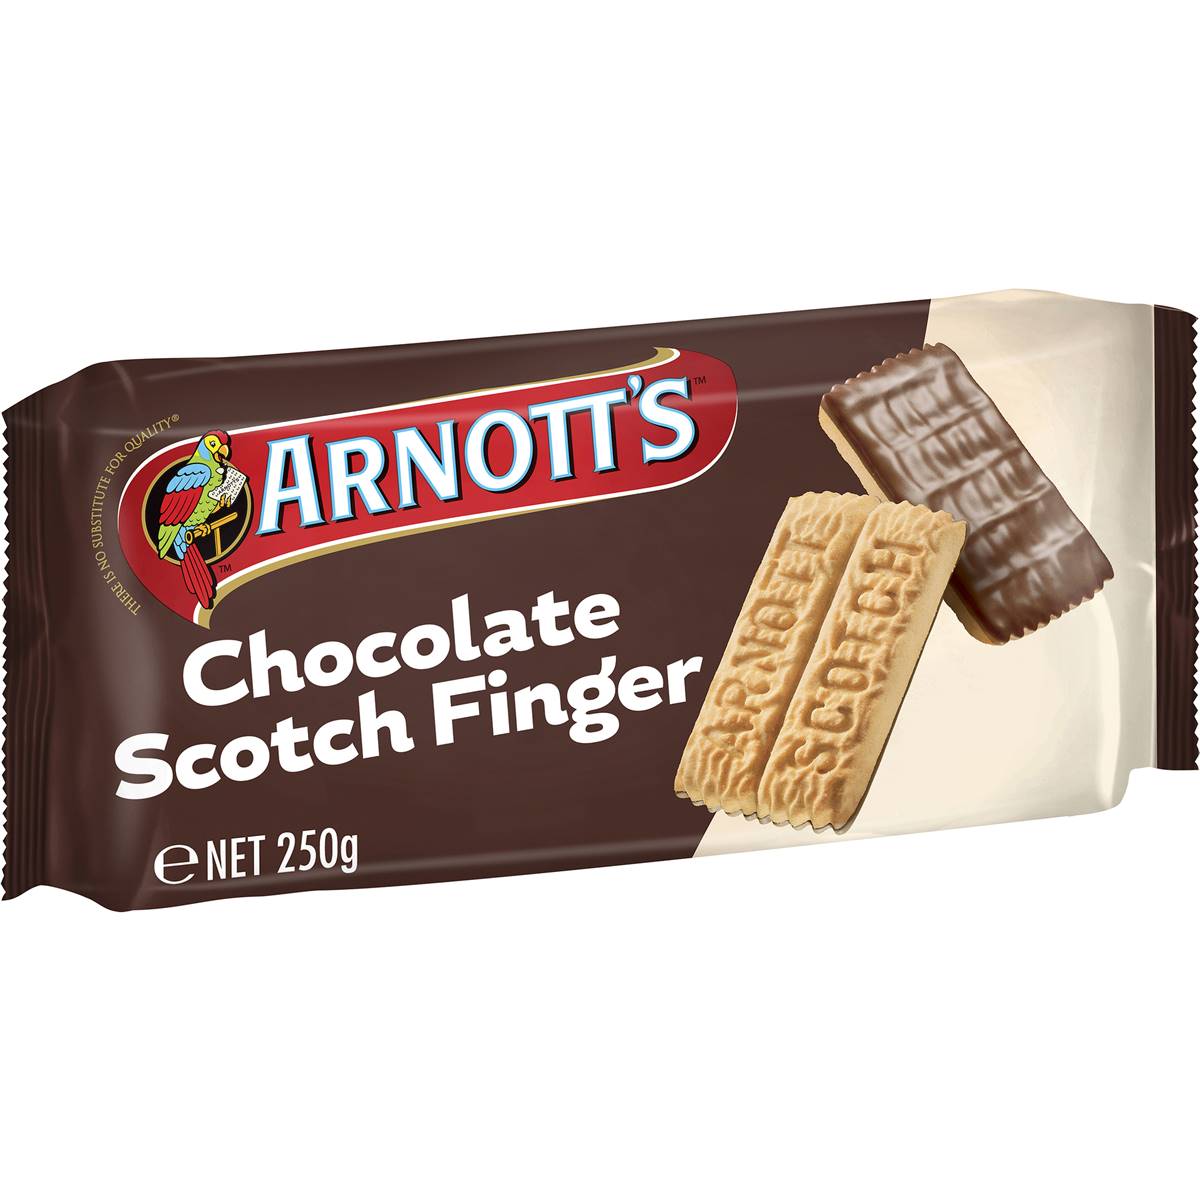 Calories In Arnotts Scotch Finger Chocolate Coated Biscuits Calcount 4393